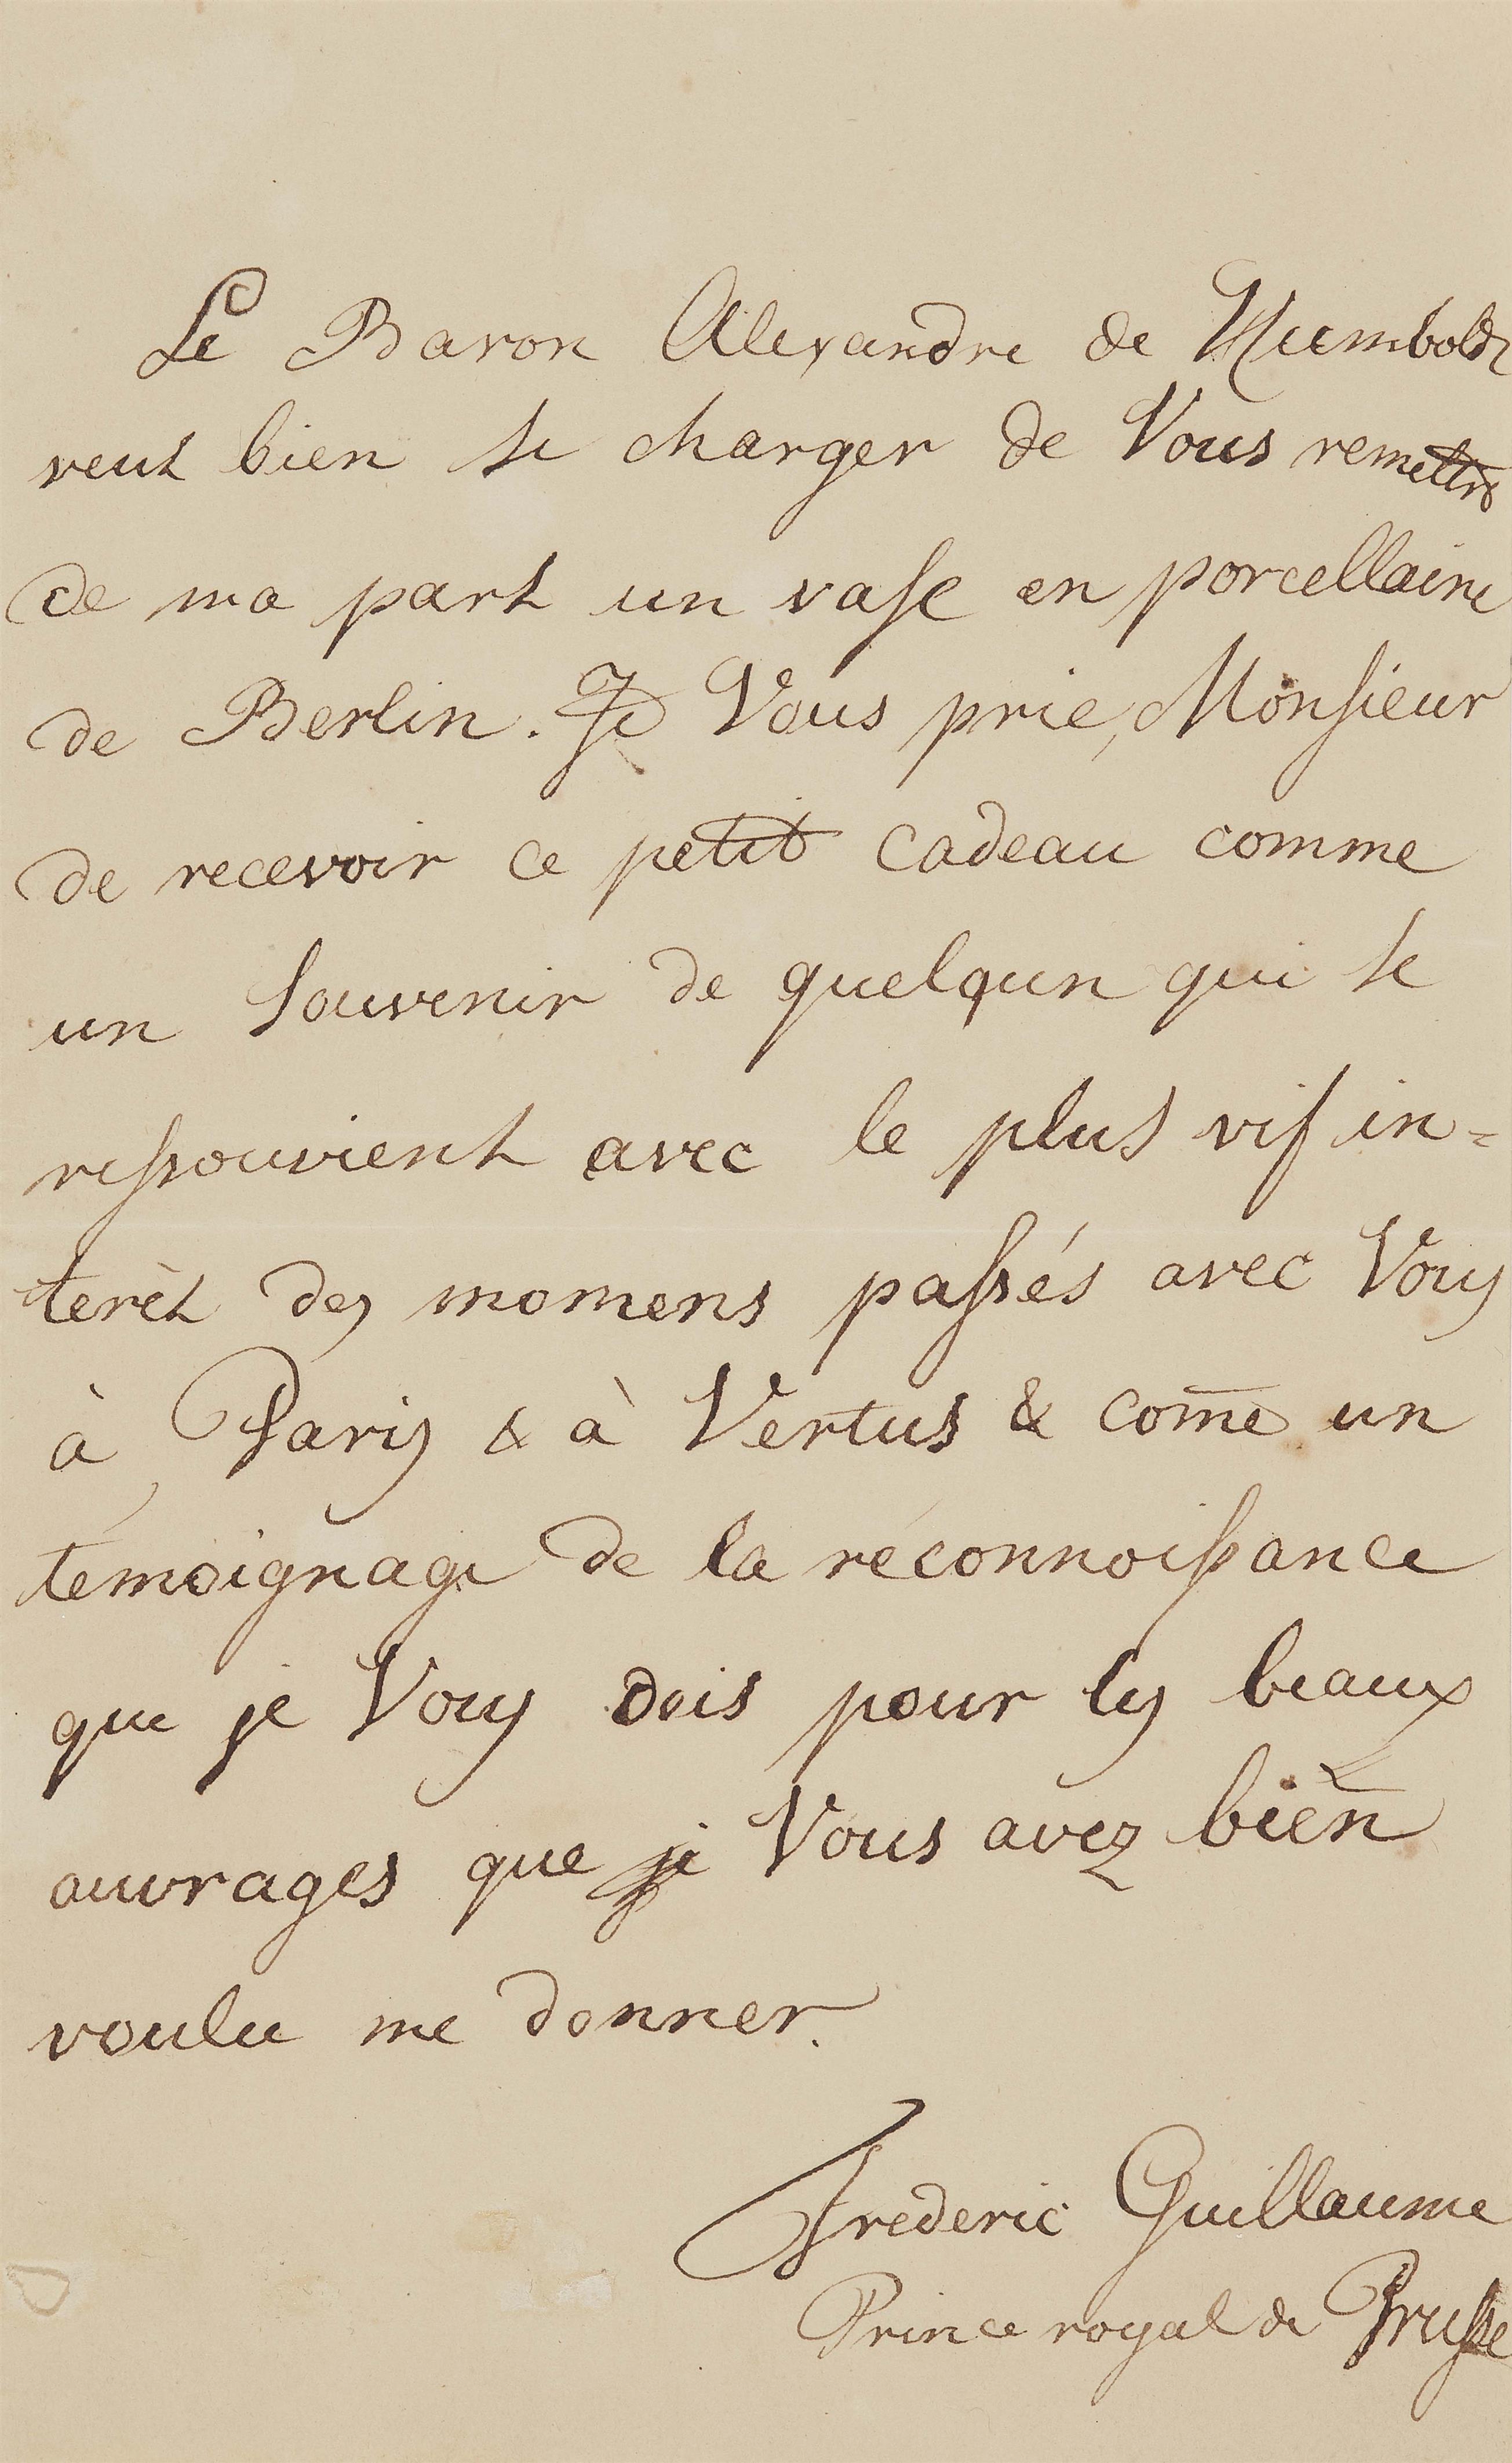 A letter from Crown Prince Frederick William, presumably to Pierre François Leonard Fontaine, discussing the presentation of a KPM porcelain vase by Alexander von Humboldt - image-1